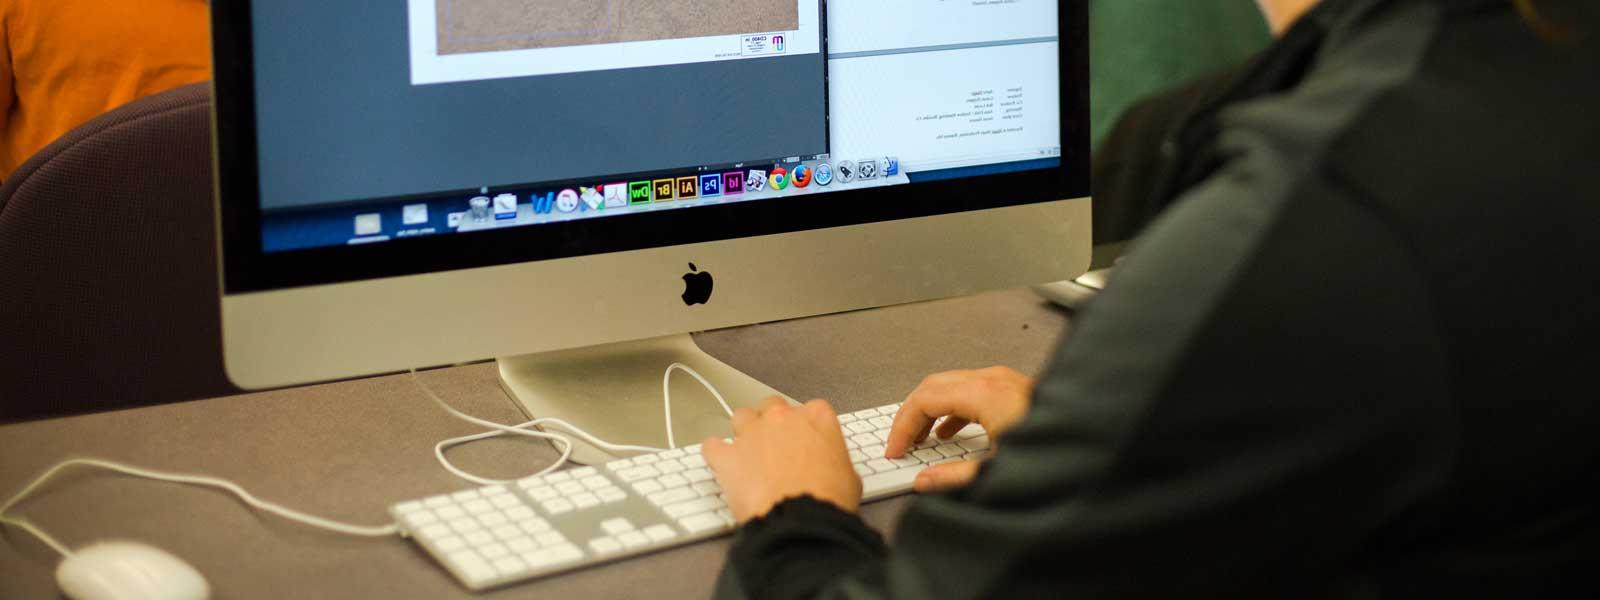 students working on graphic design projects on large Mac computers